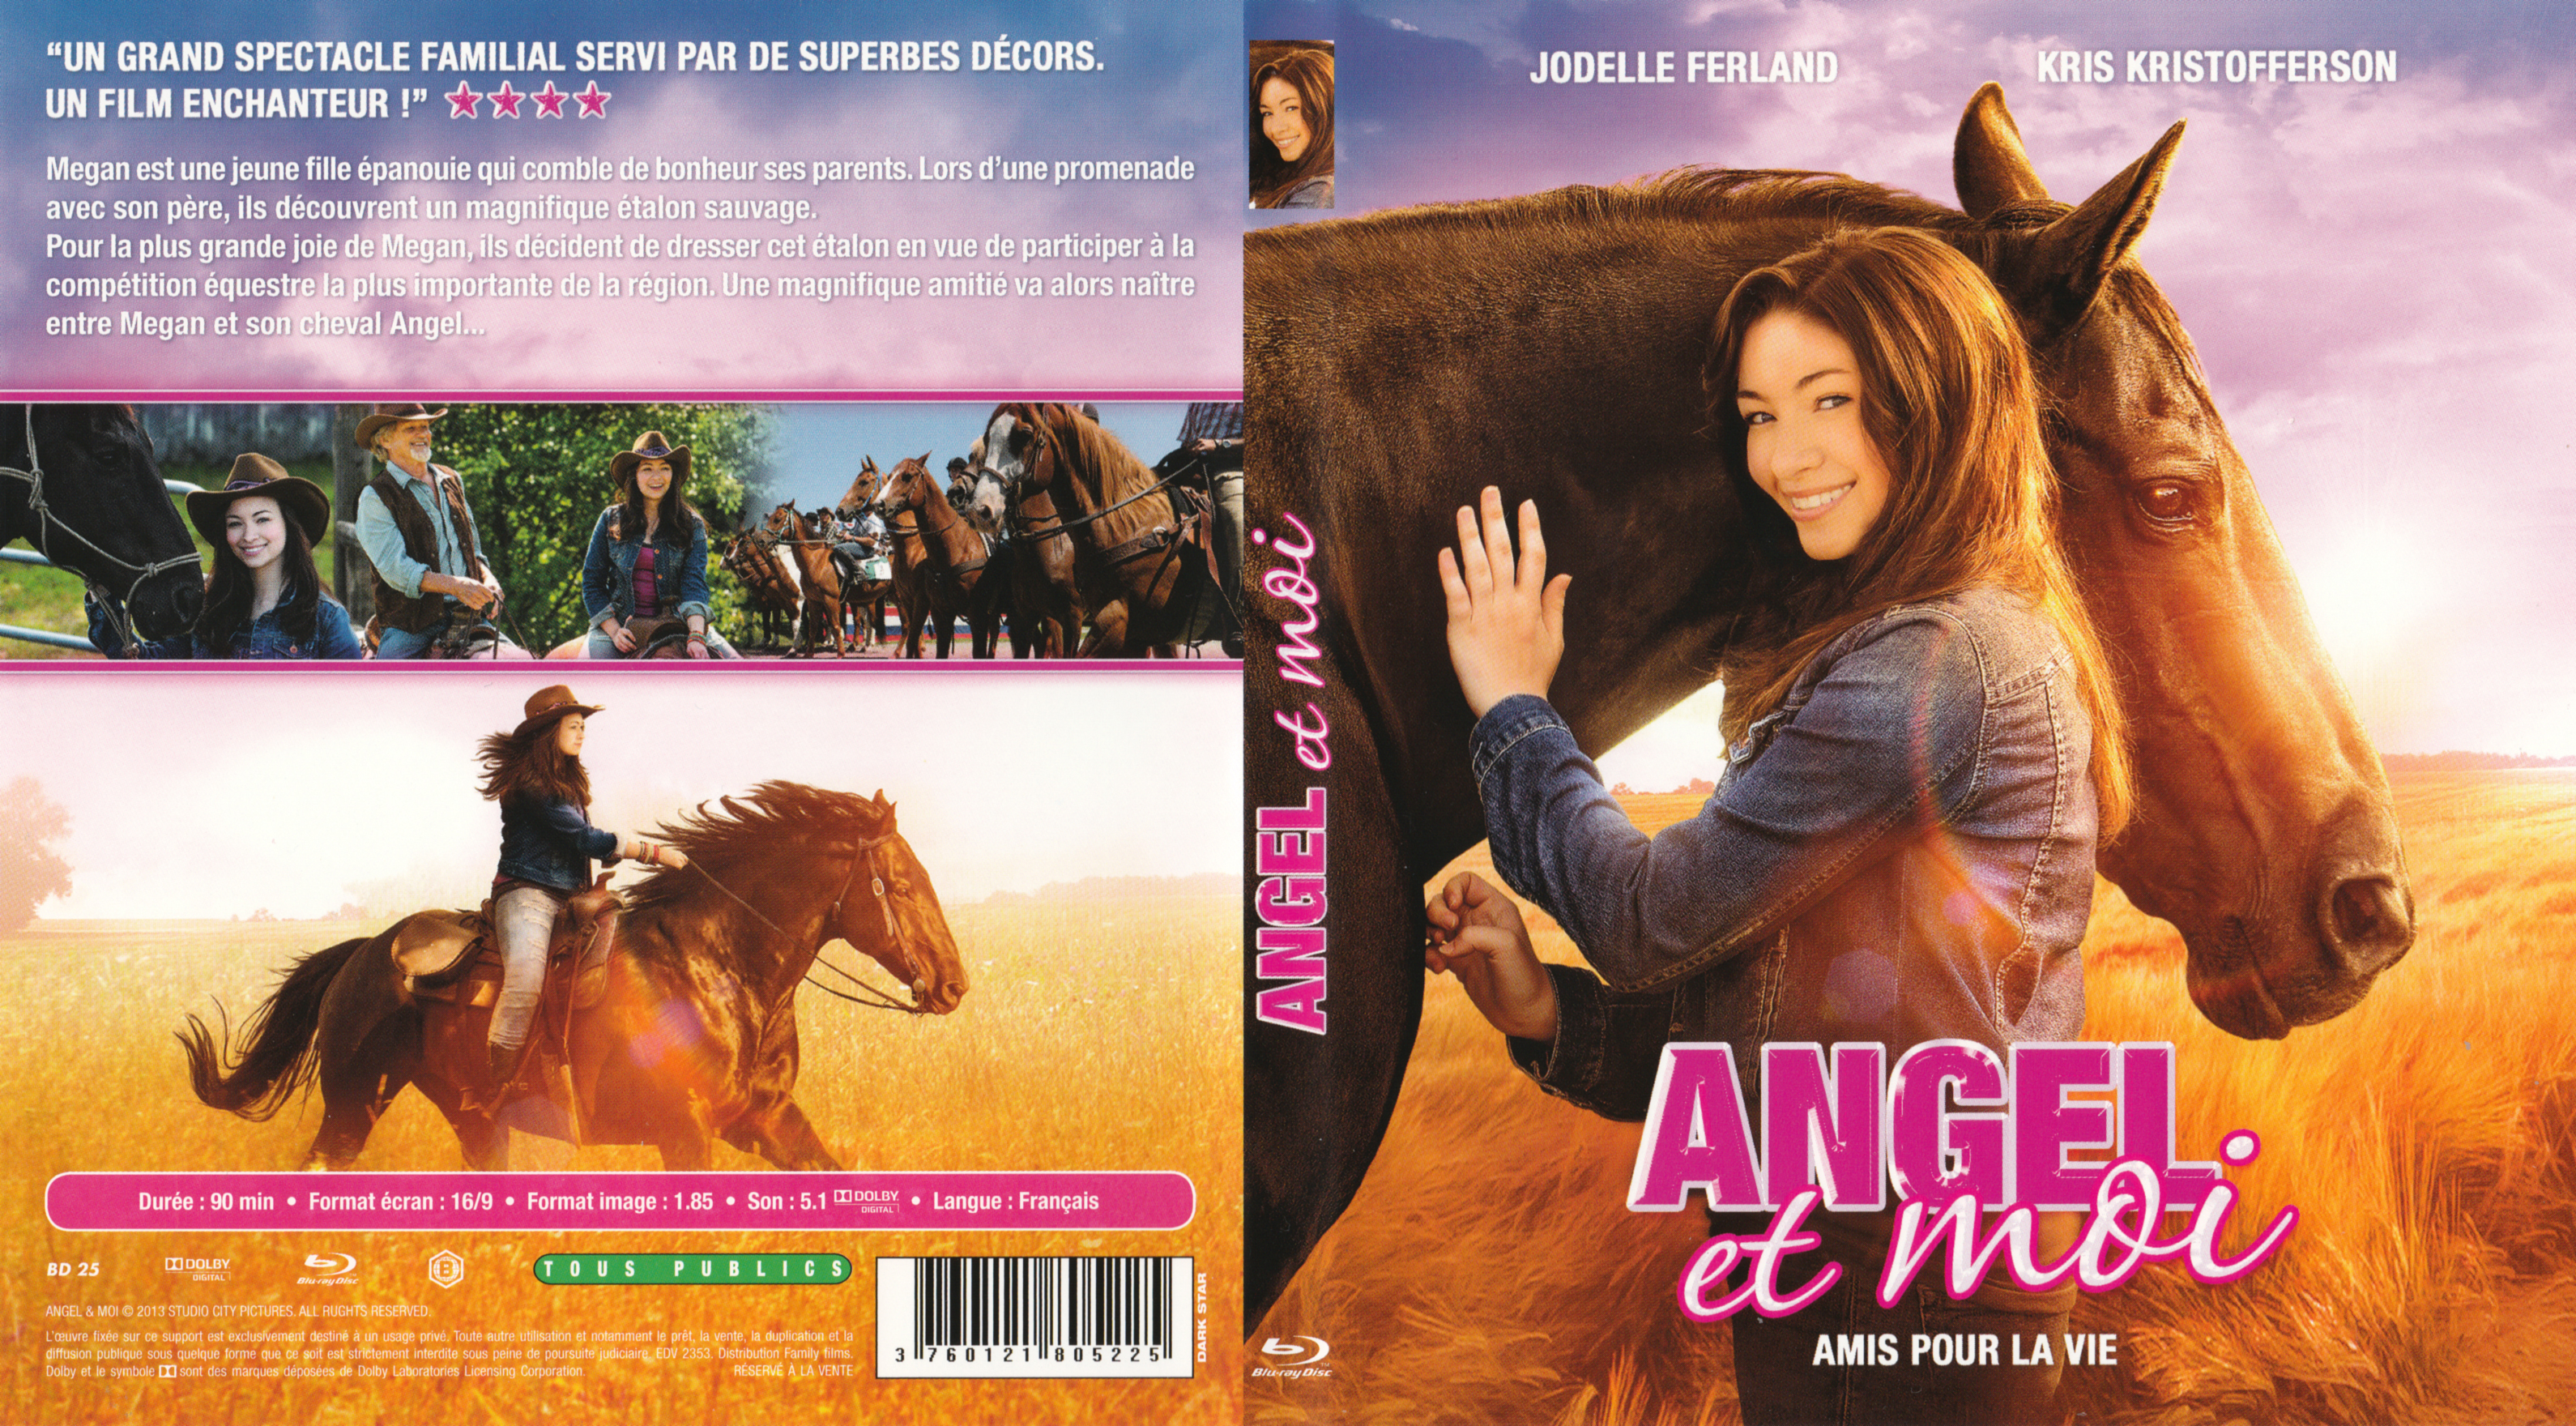 Jaquette DVD Angel et moi (BLU-RAY)